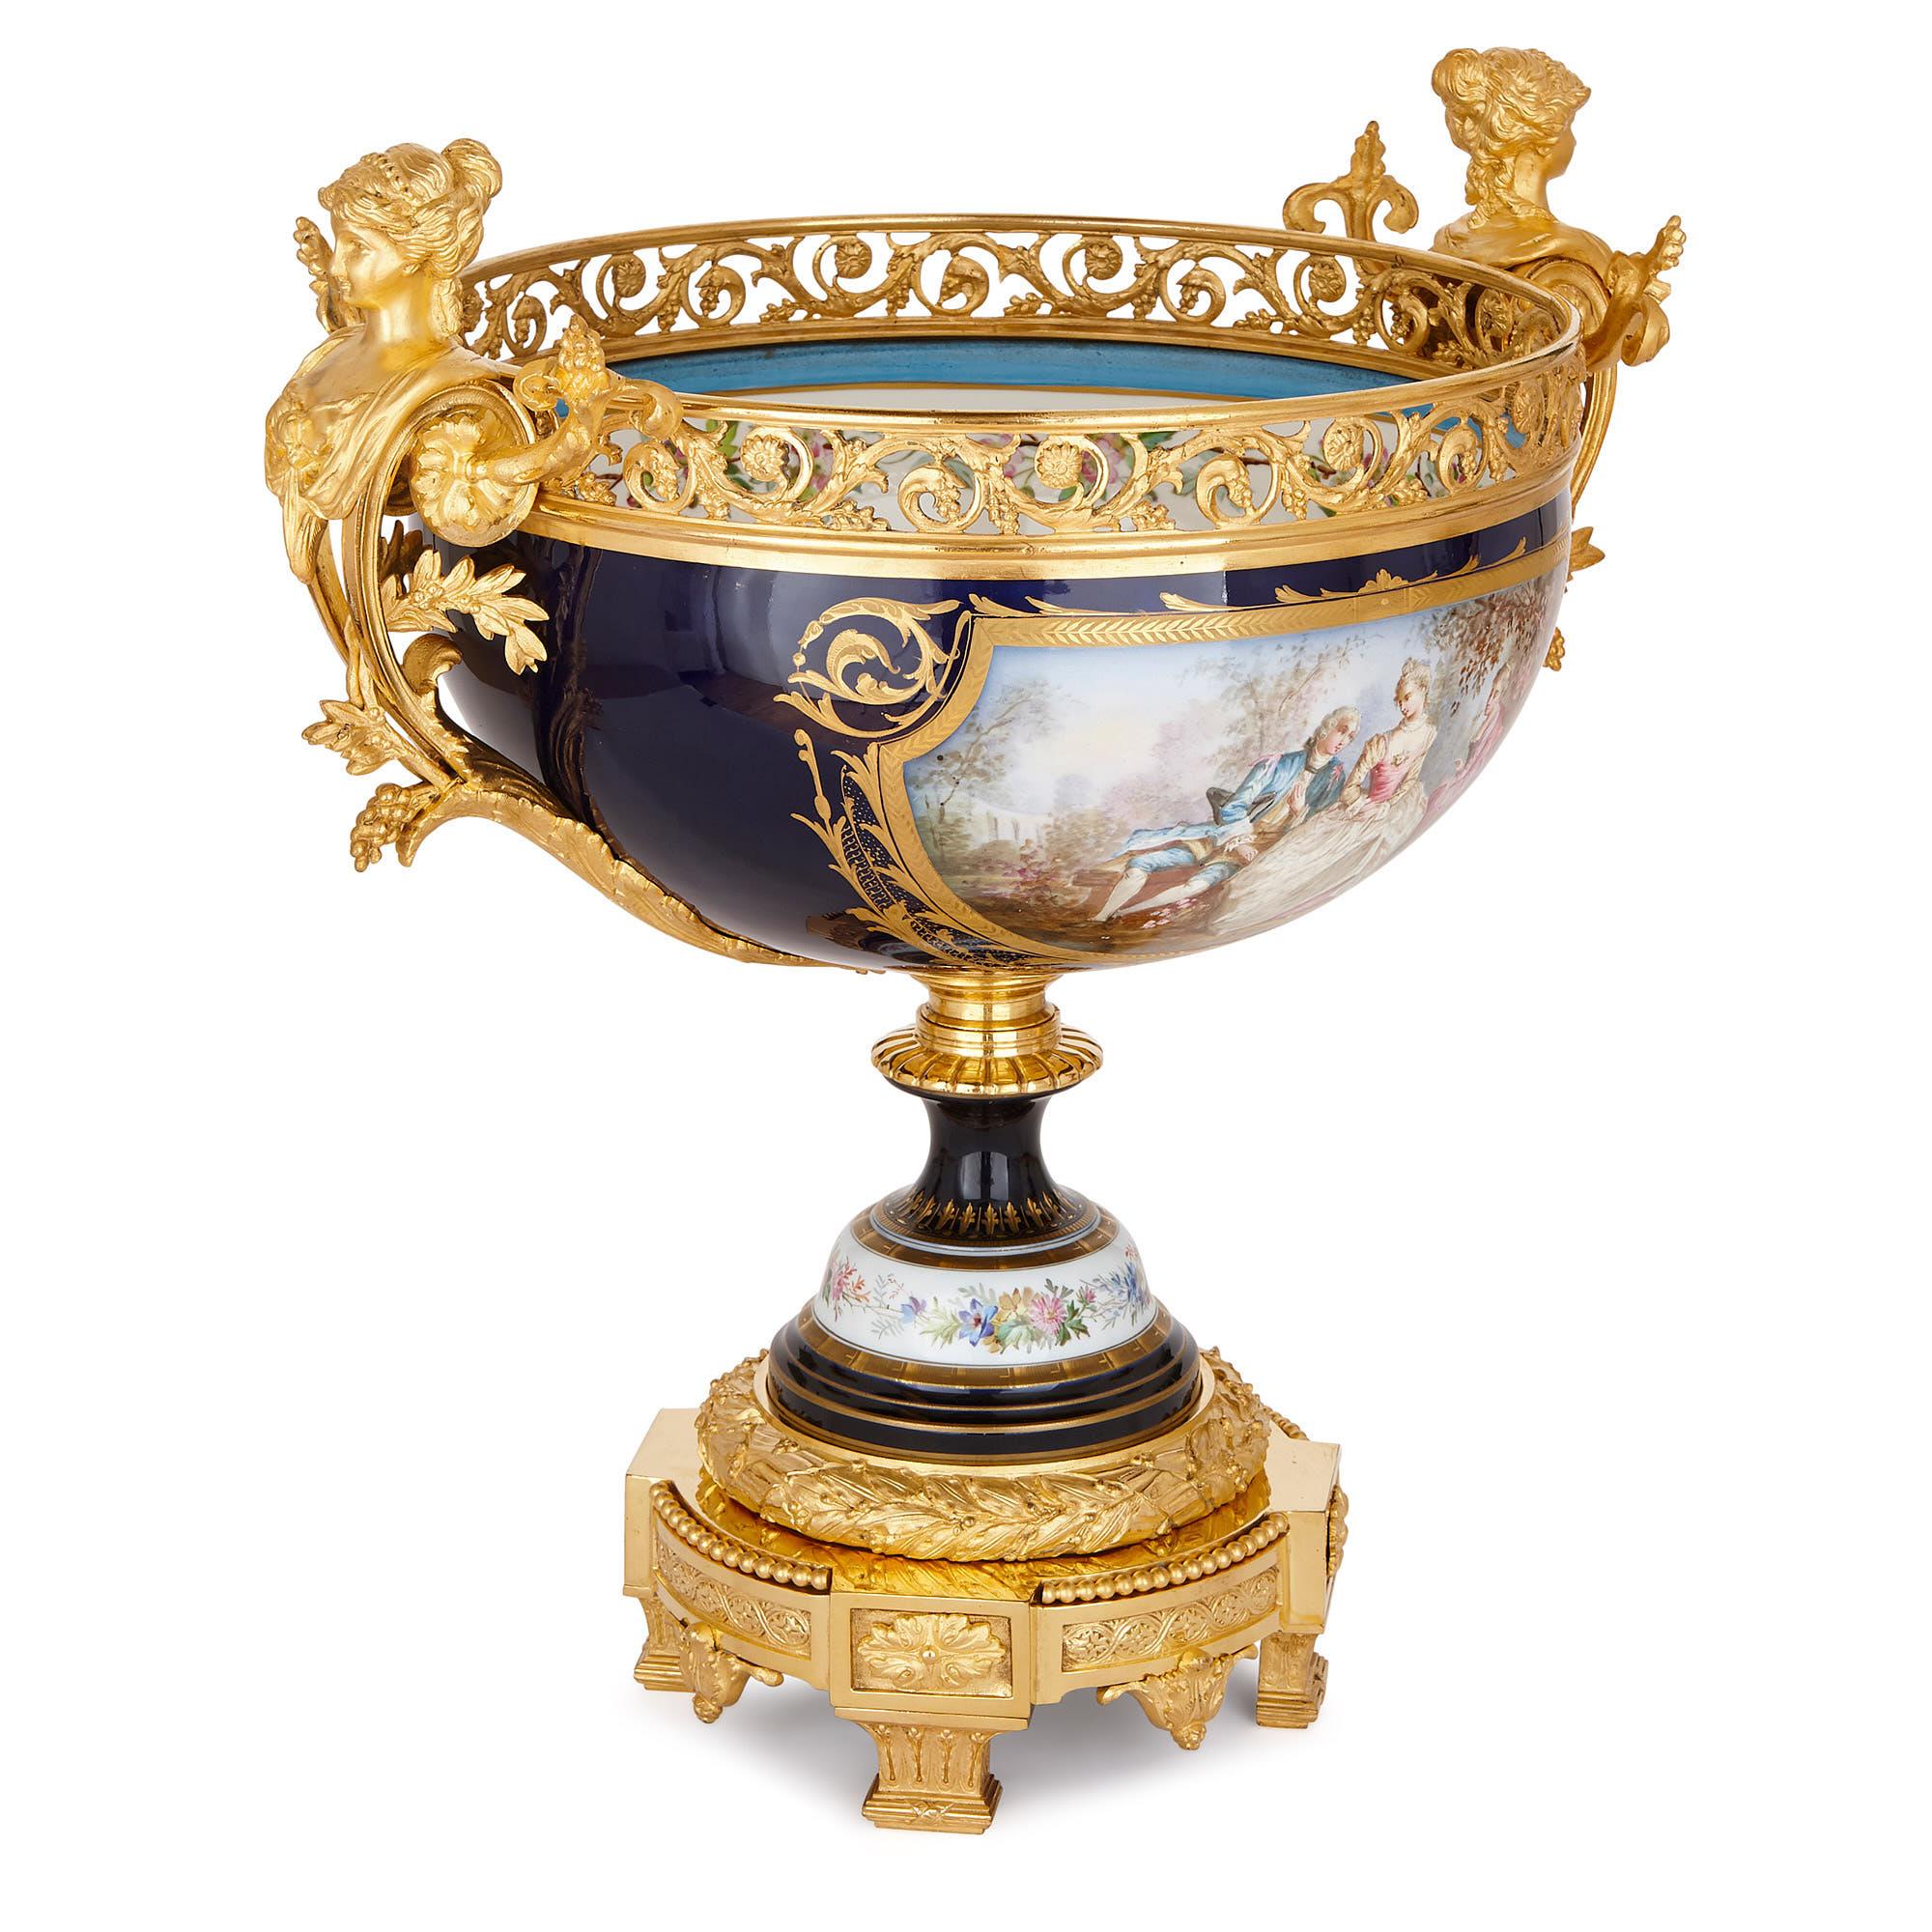 This exquisite, three-piece garniture will make a wonderful addition to a mantelpiece, niche or table, where its fine design and craftsmanship can be properly enjoyed. 

The garniture consists of a jardinière, which has a wide and shallow bowl,